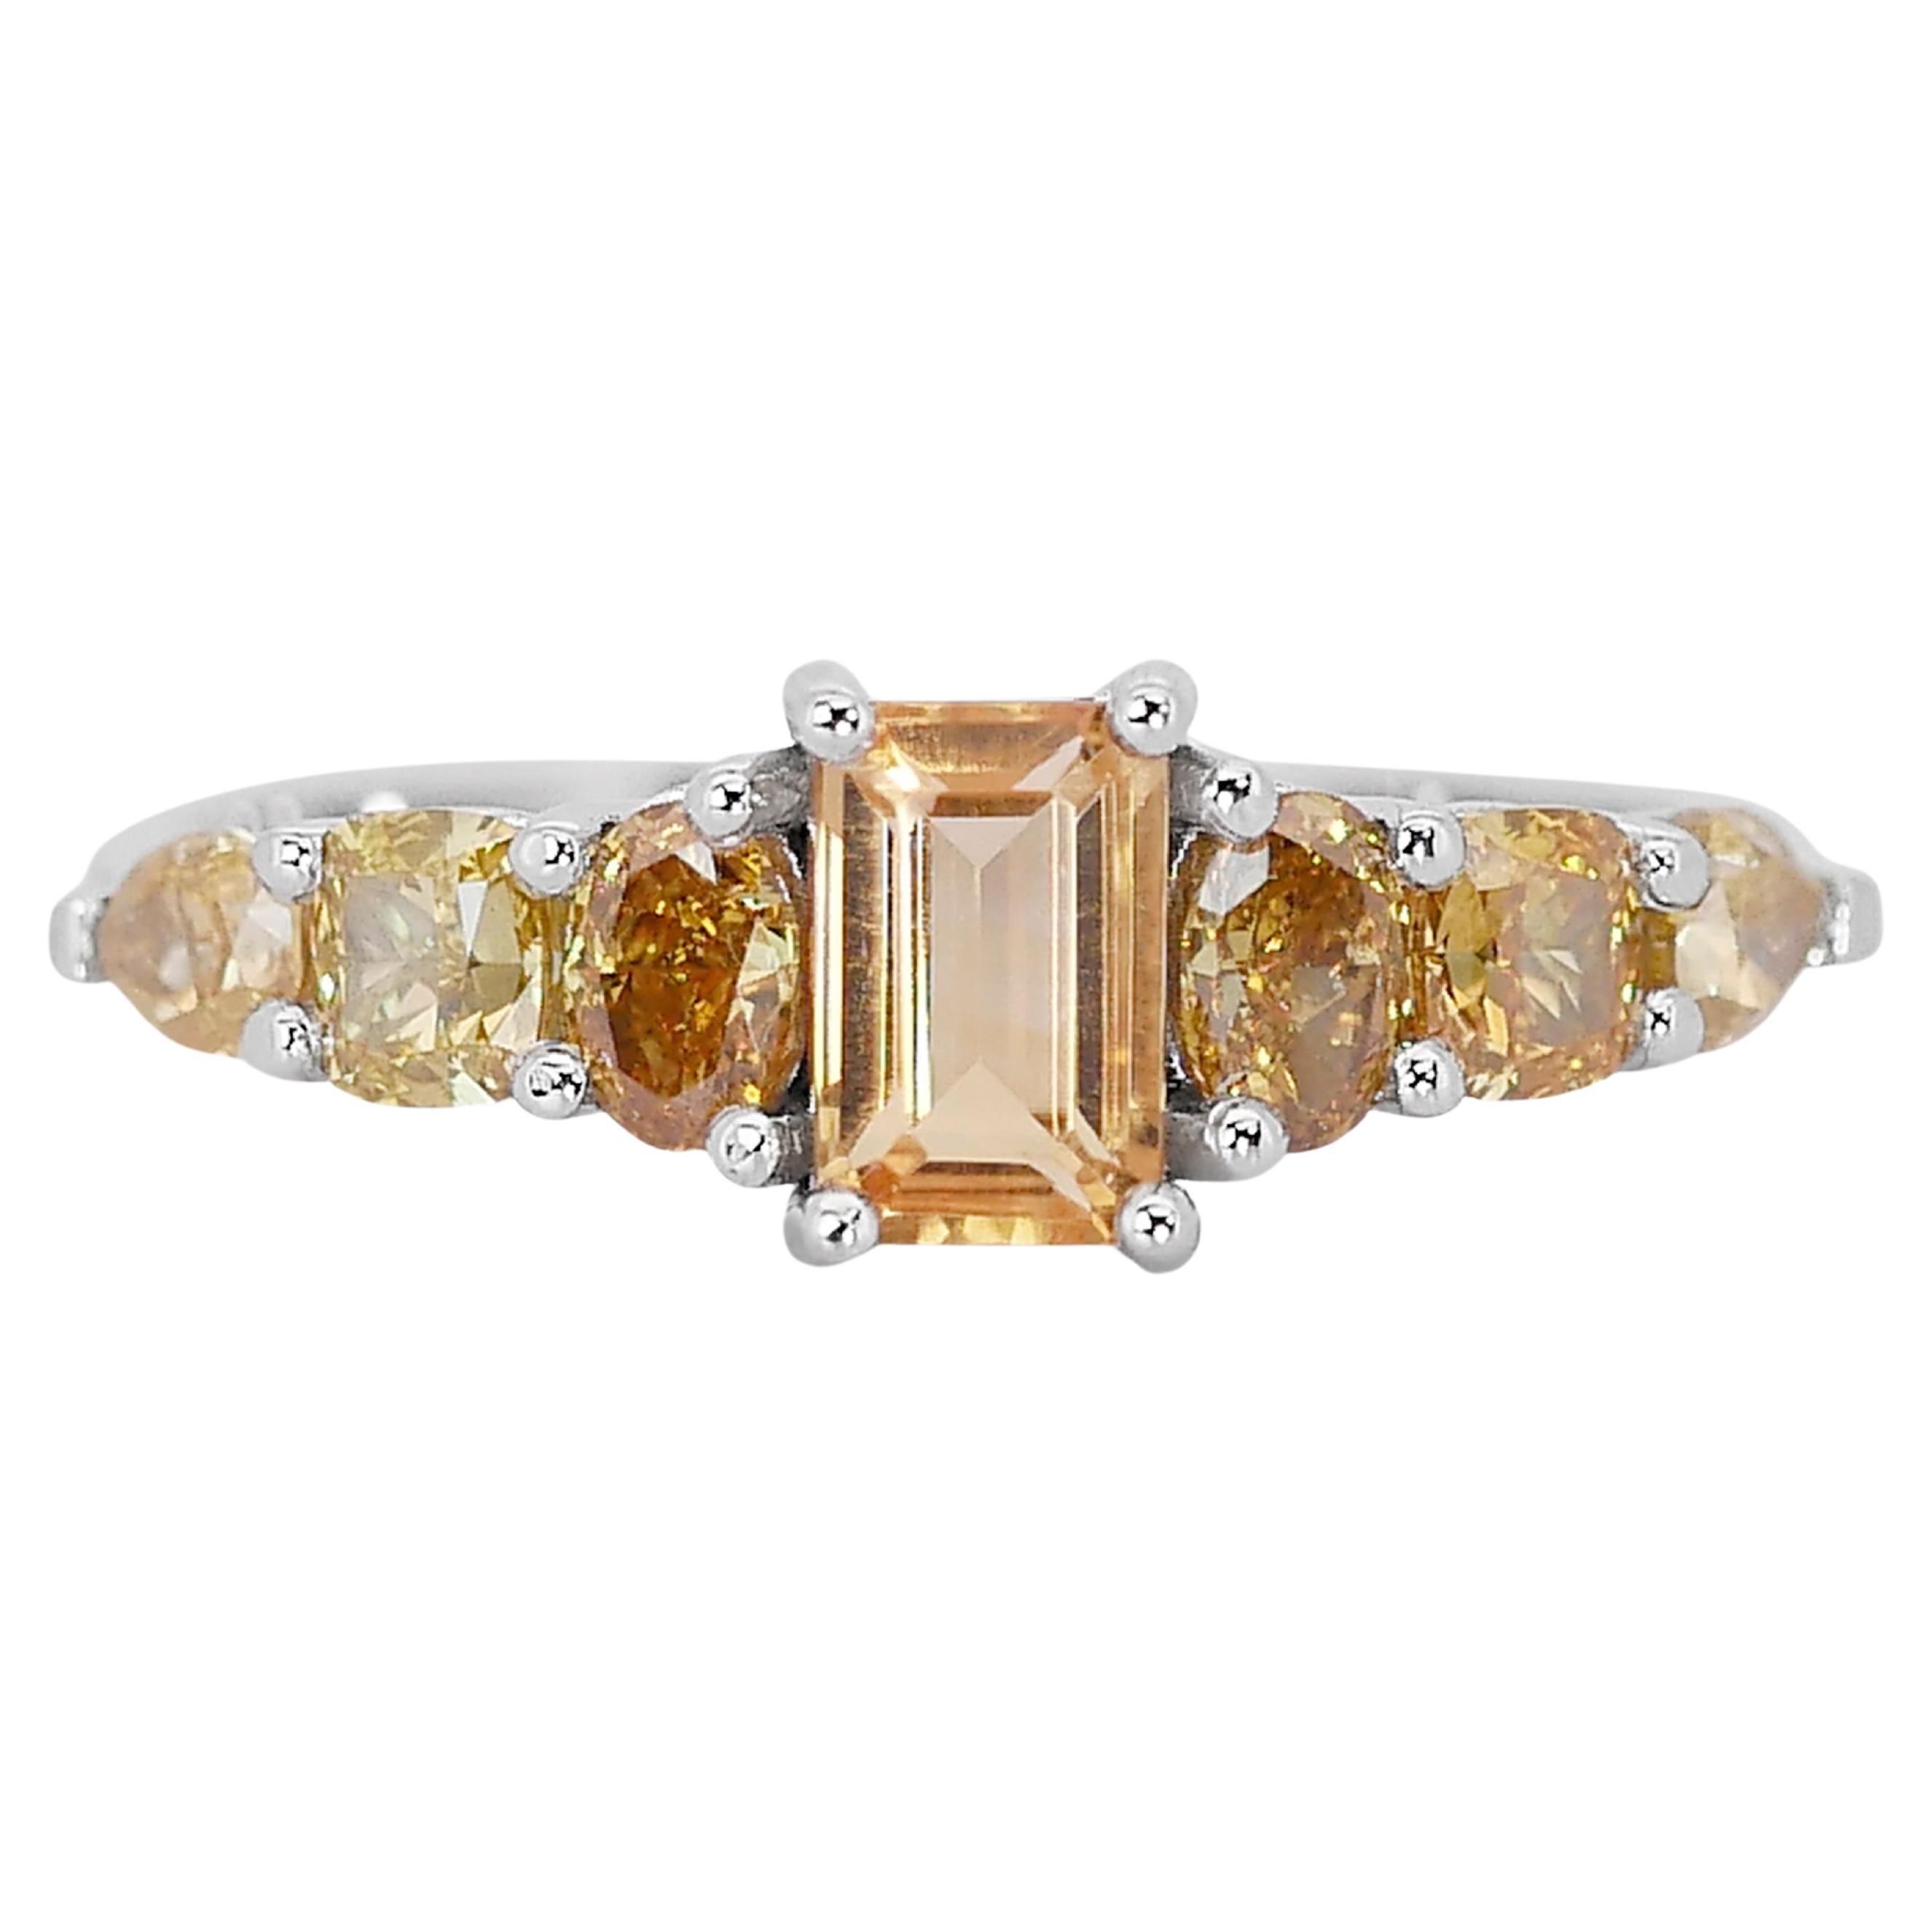 Shining 14k White Gold Citrine and Diamond Fancy Colored Ring w/1.52 ct - AIG 